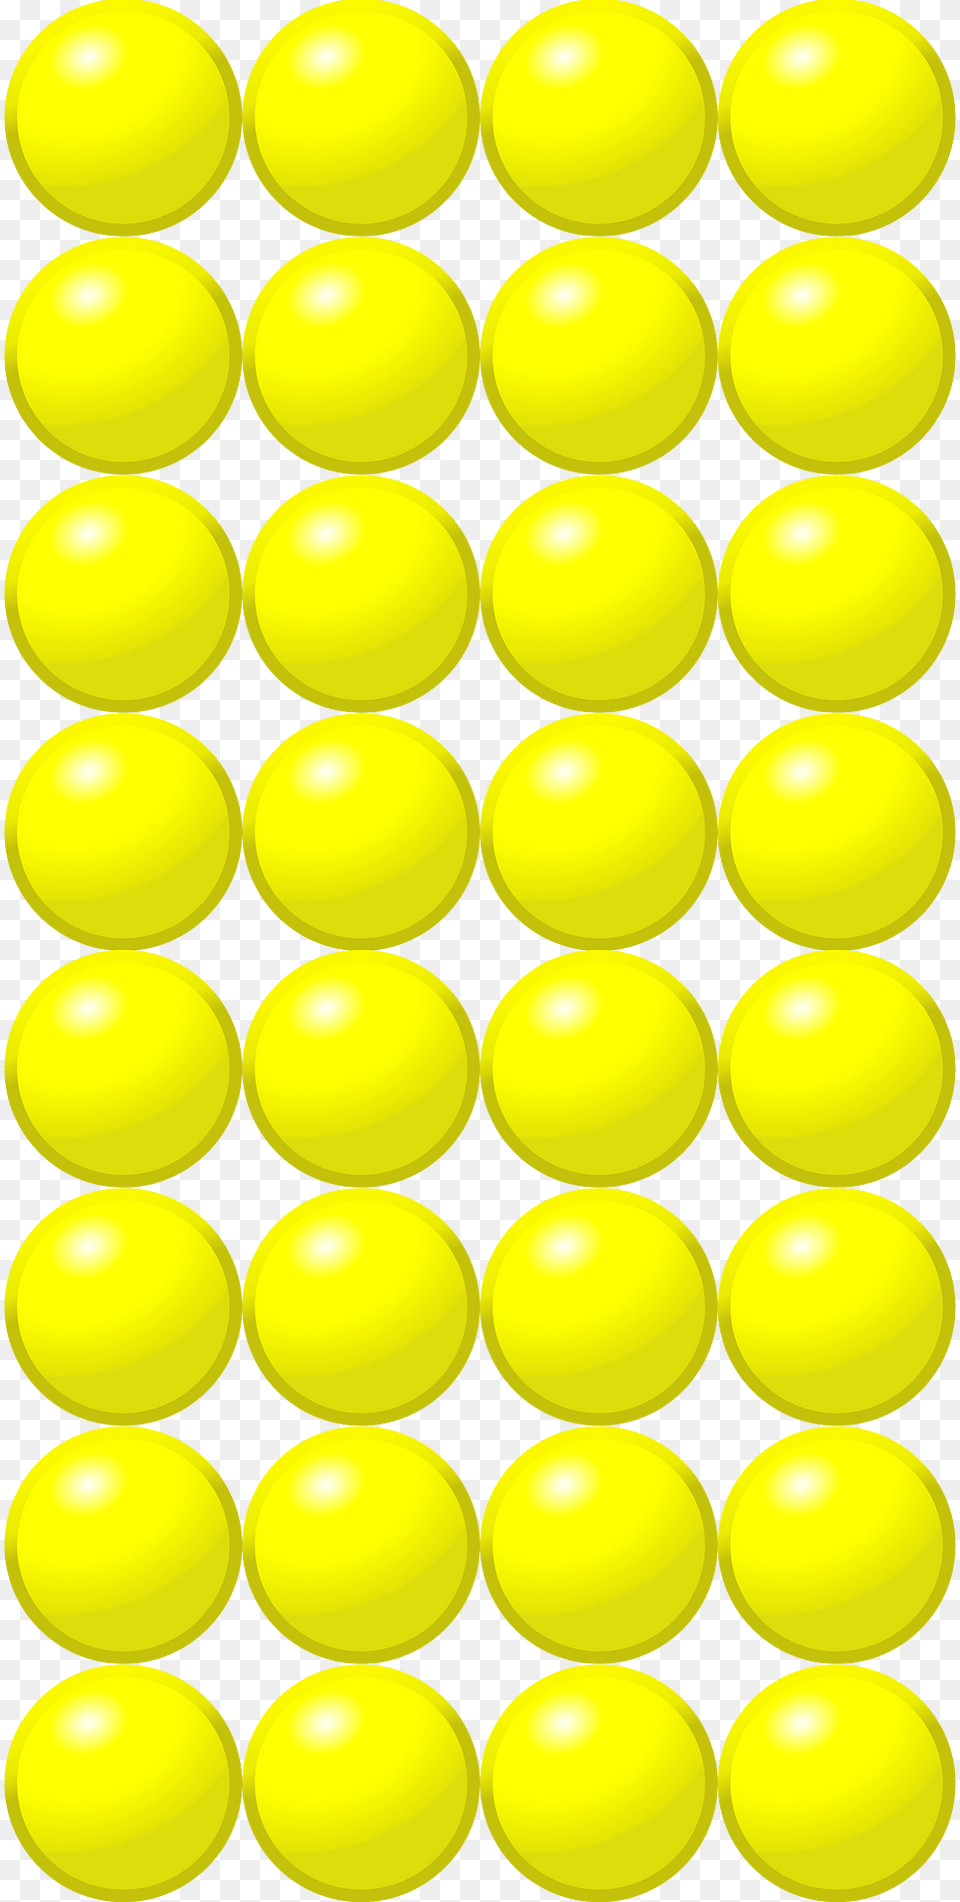 Beads Quantitative Picture For Multiplication 8x4 Clipart, Sphere, Pattern Png